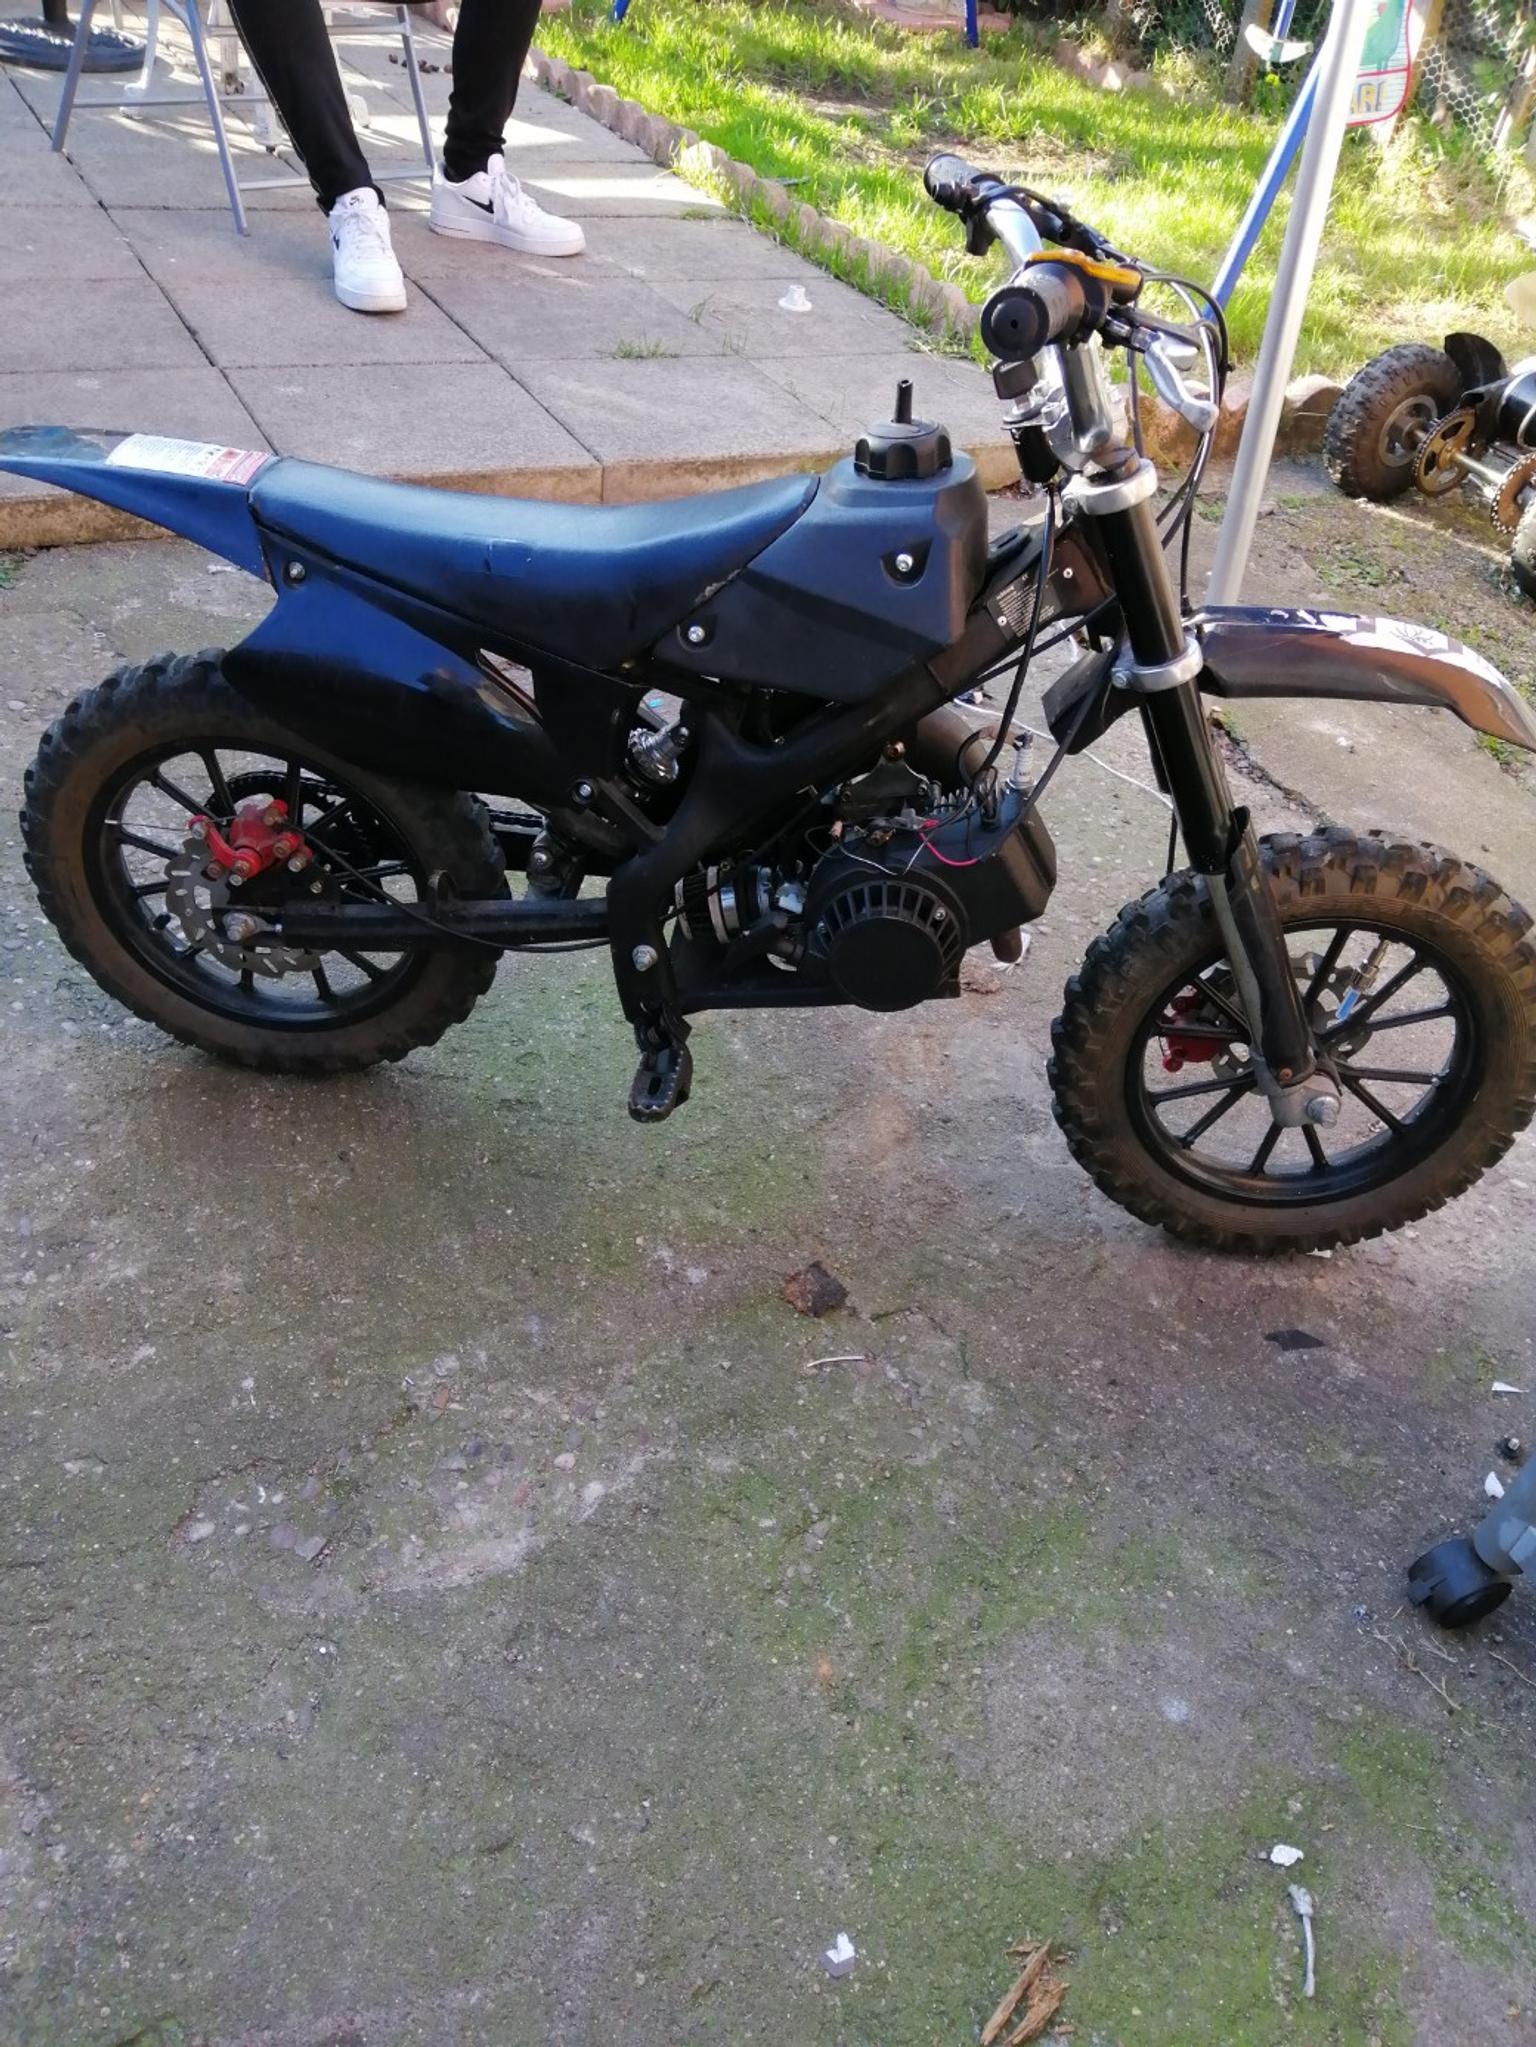 50cc fast mini motor in M11 Manchester for £100.00 for